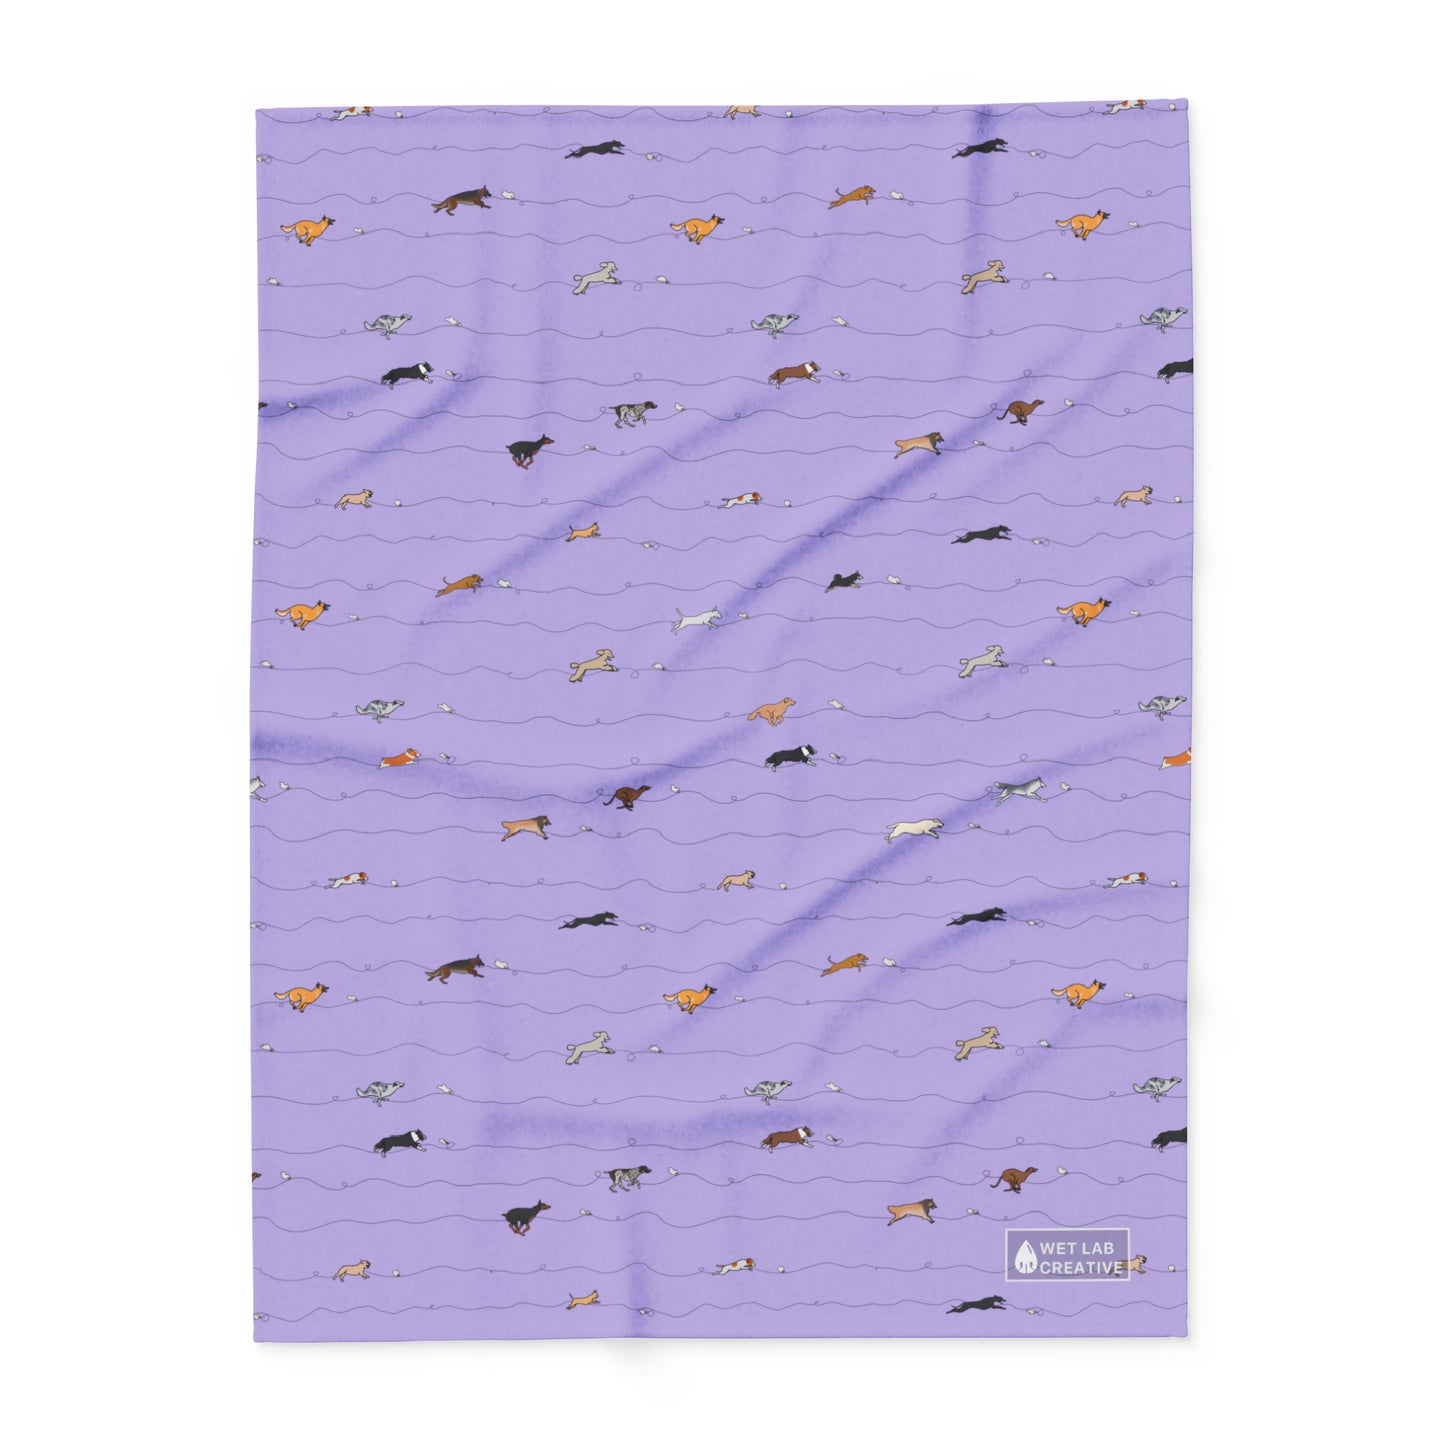 FastCat Lure Coursing Arctic Fleece Blanket in Lavender Teal Navy and Gray